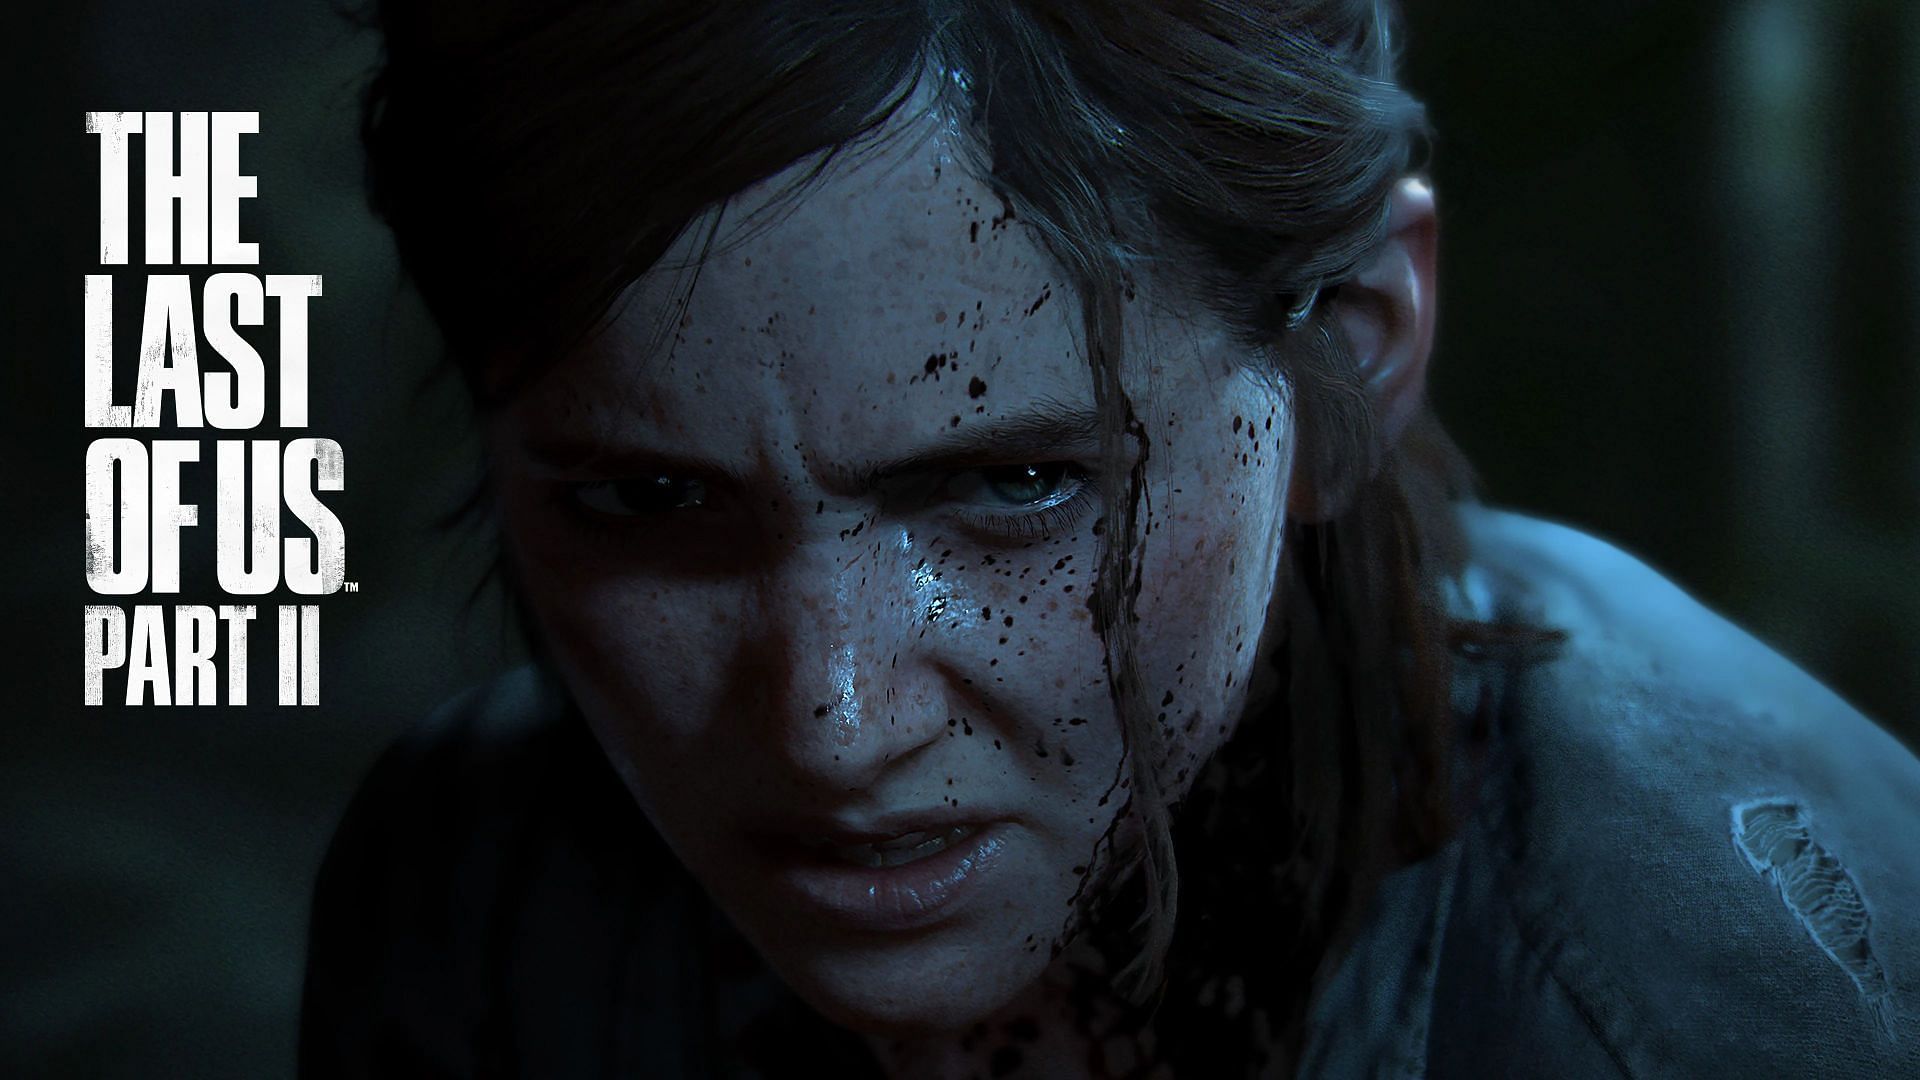 Abby was largely hated as an antagonist by the gaming community. (Image via Naughty Dog)